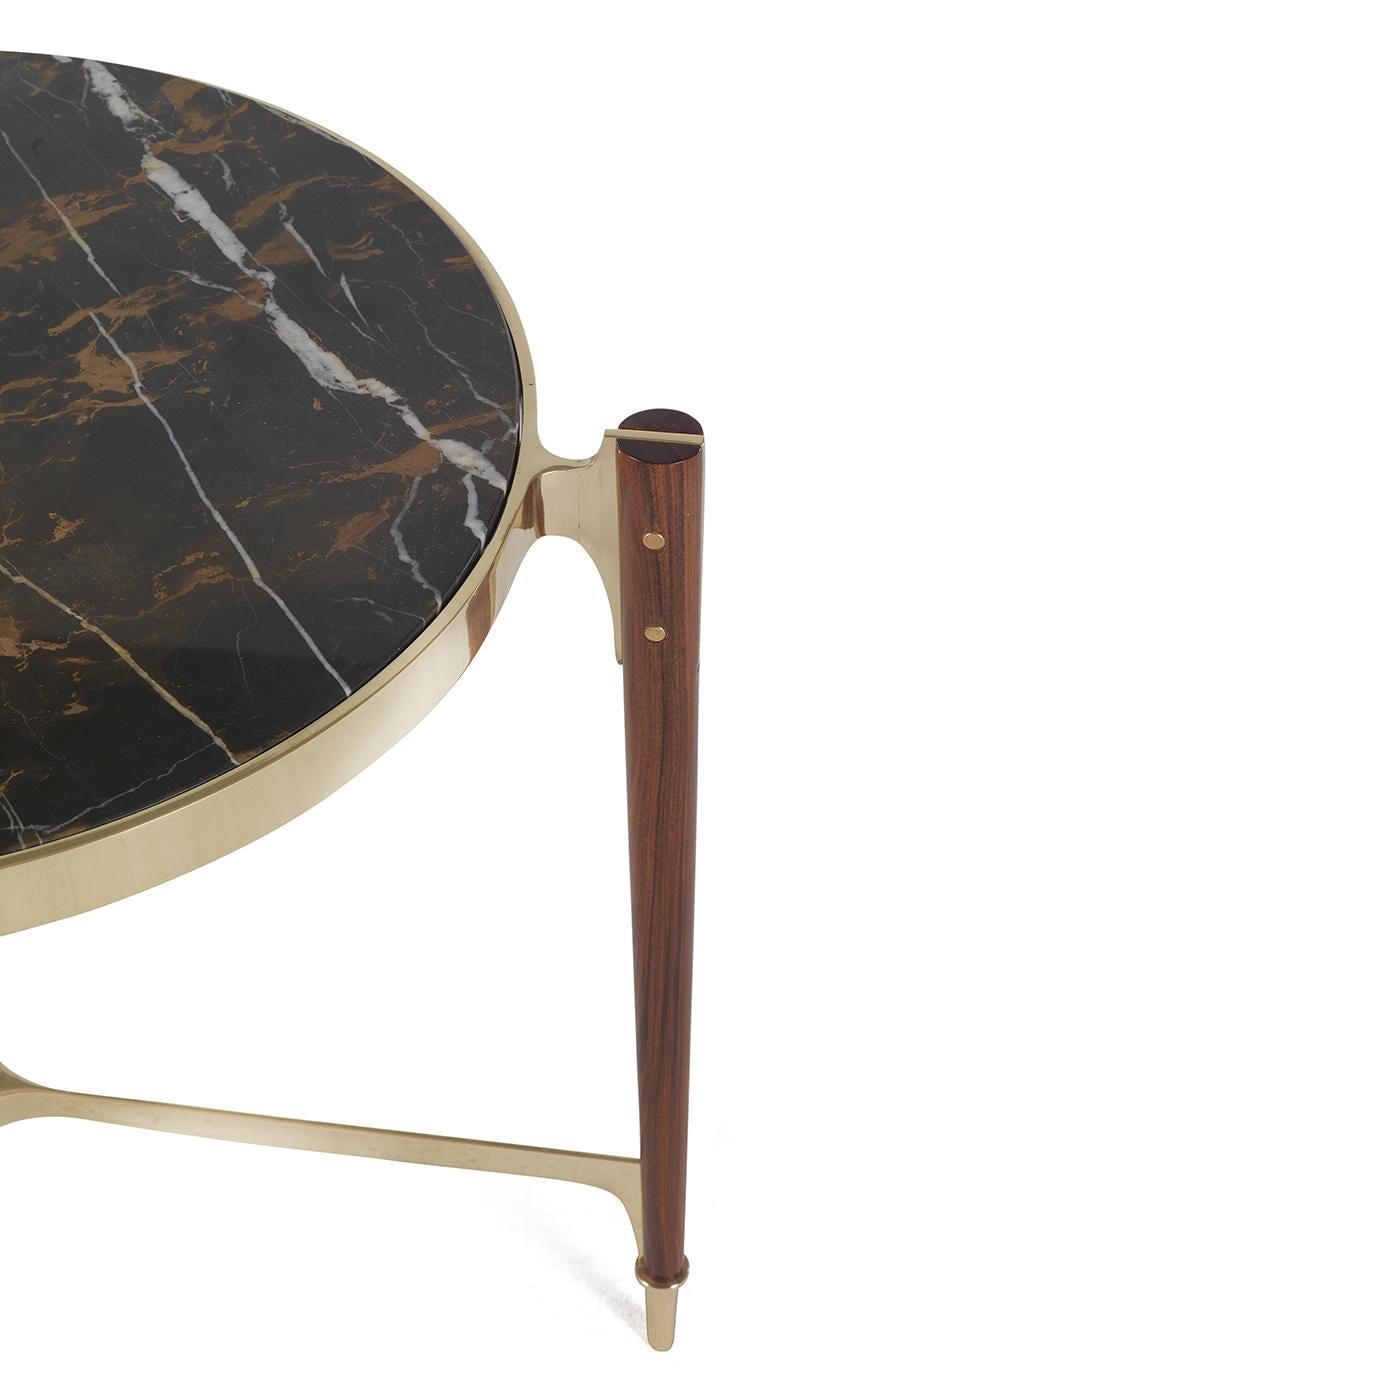 A stunning piece of functional decor, this elegant side table can be displayed alone or combined with the other different pieces by the same designer for a dynamic effect. The unique silhouette of this table, its masterful craftsmanship, and the use